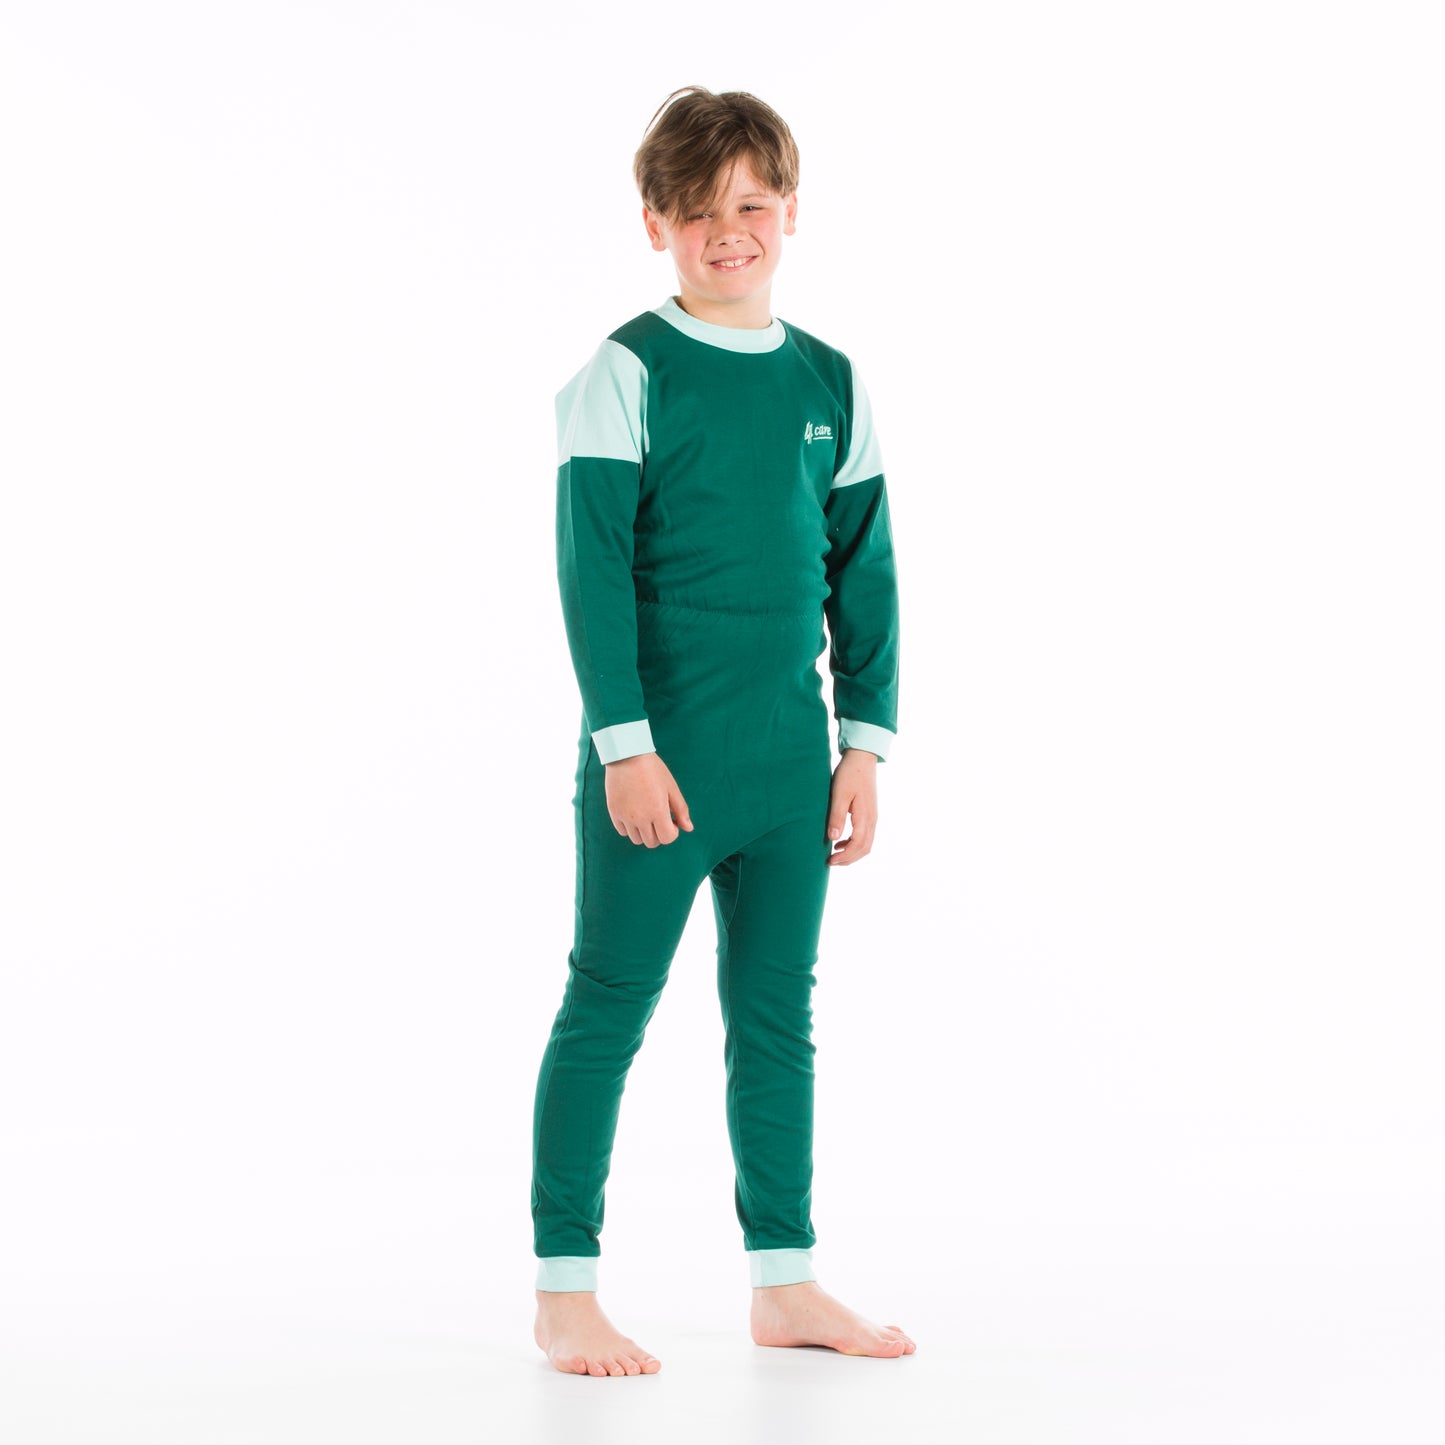 Children's All-in-One Jumpsuit With a Zip Up The Back (4030)